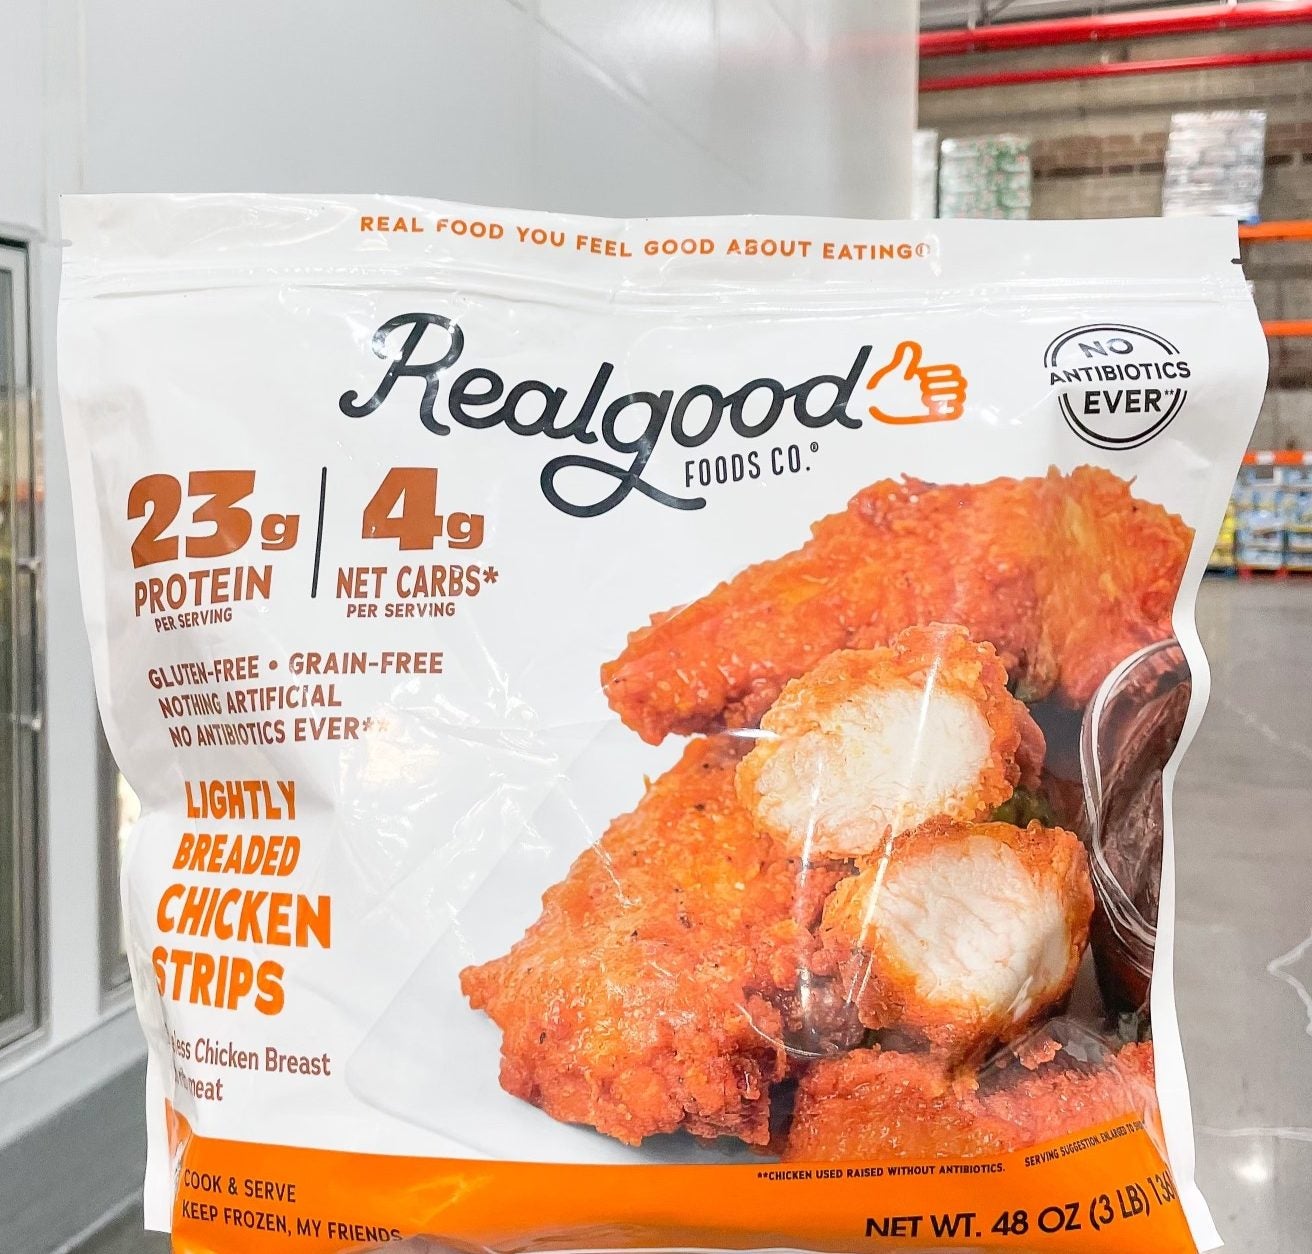 Real Good Foods Co. points to prospect of profit turnaround